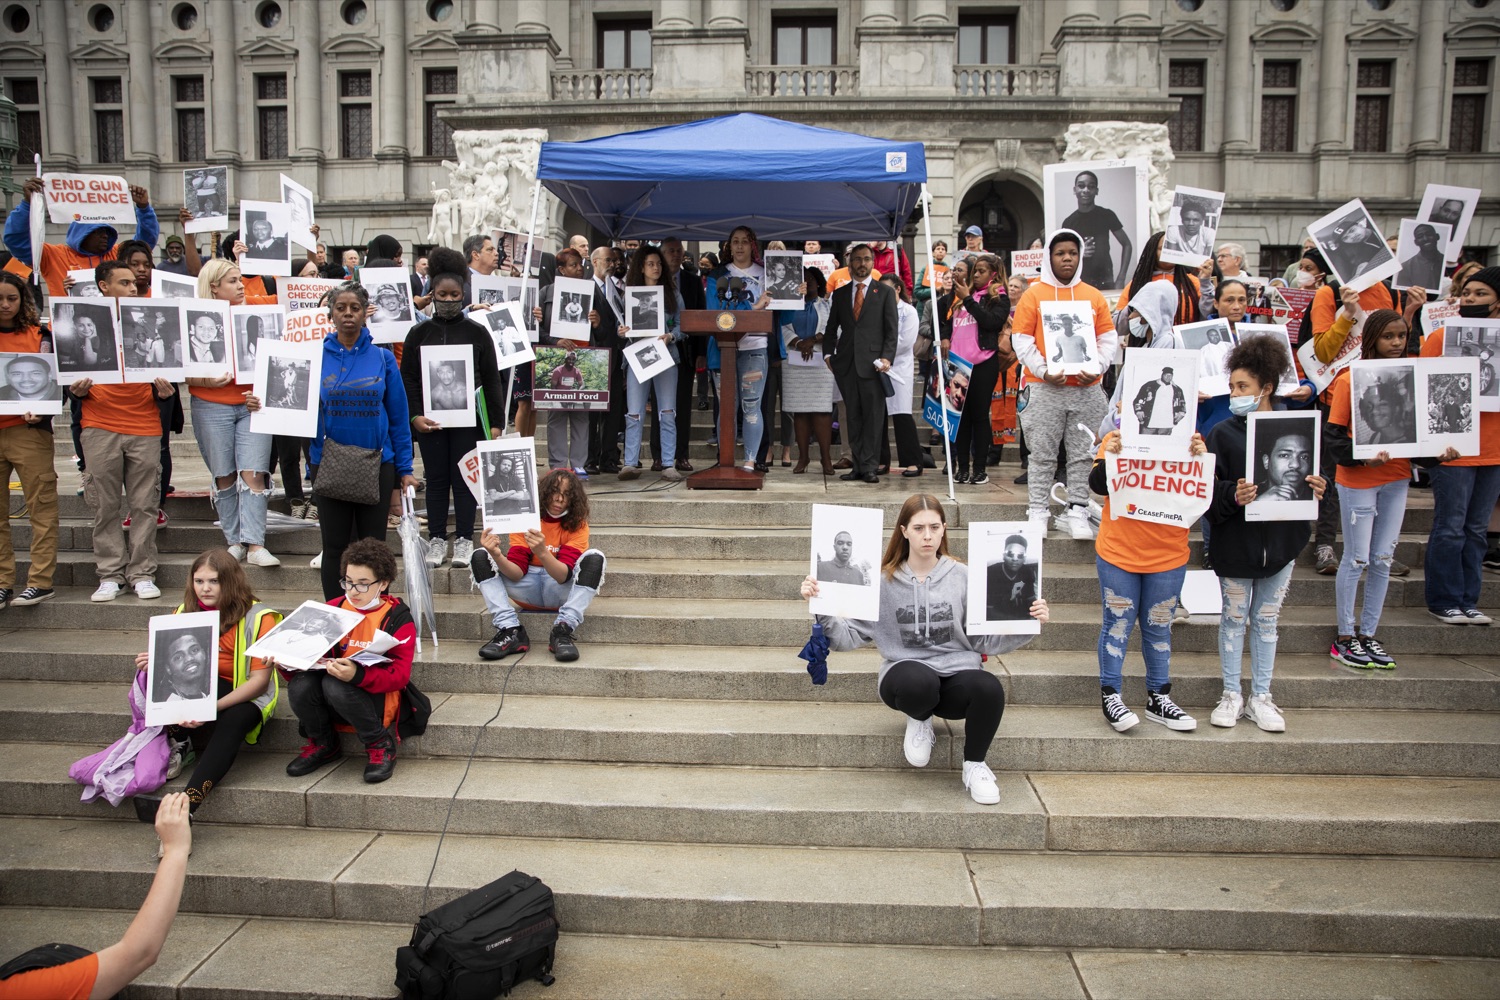 Governor Tom Wolf, joined by CeaseFirePA and more than 200 Pennsylvanians at the Capitol, calls for legislative action to save lives against gun violence, in Harrisburg, PA on April 26, 2022.<br><a href="https://filesource.amperwave.net/commonwealthofpa/photo/20782_gov_ceaseFirePA_01.JPG" target="_blank">⇣ Download Photo</a>